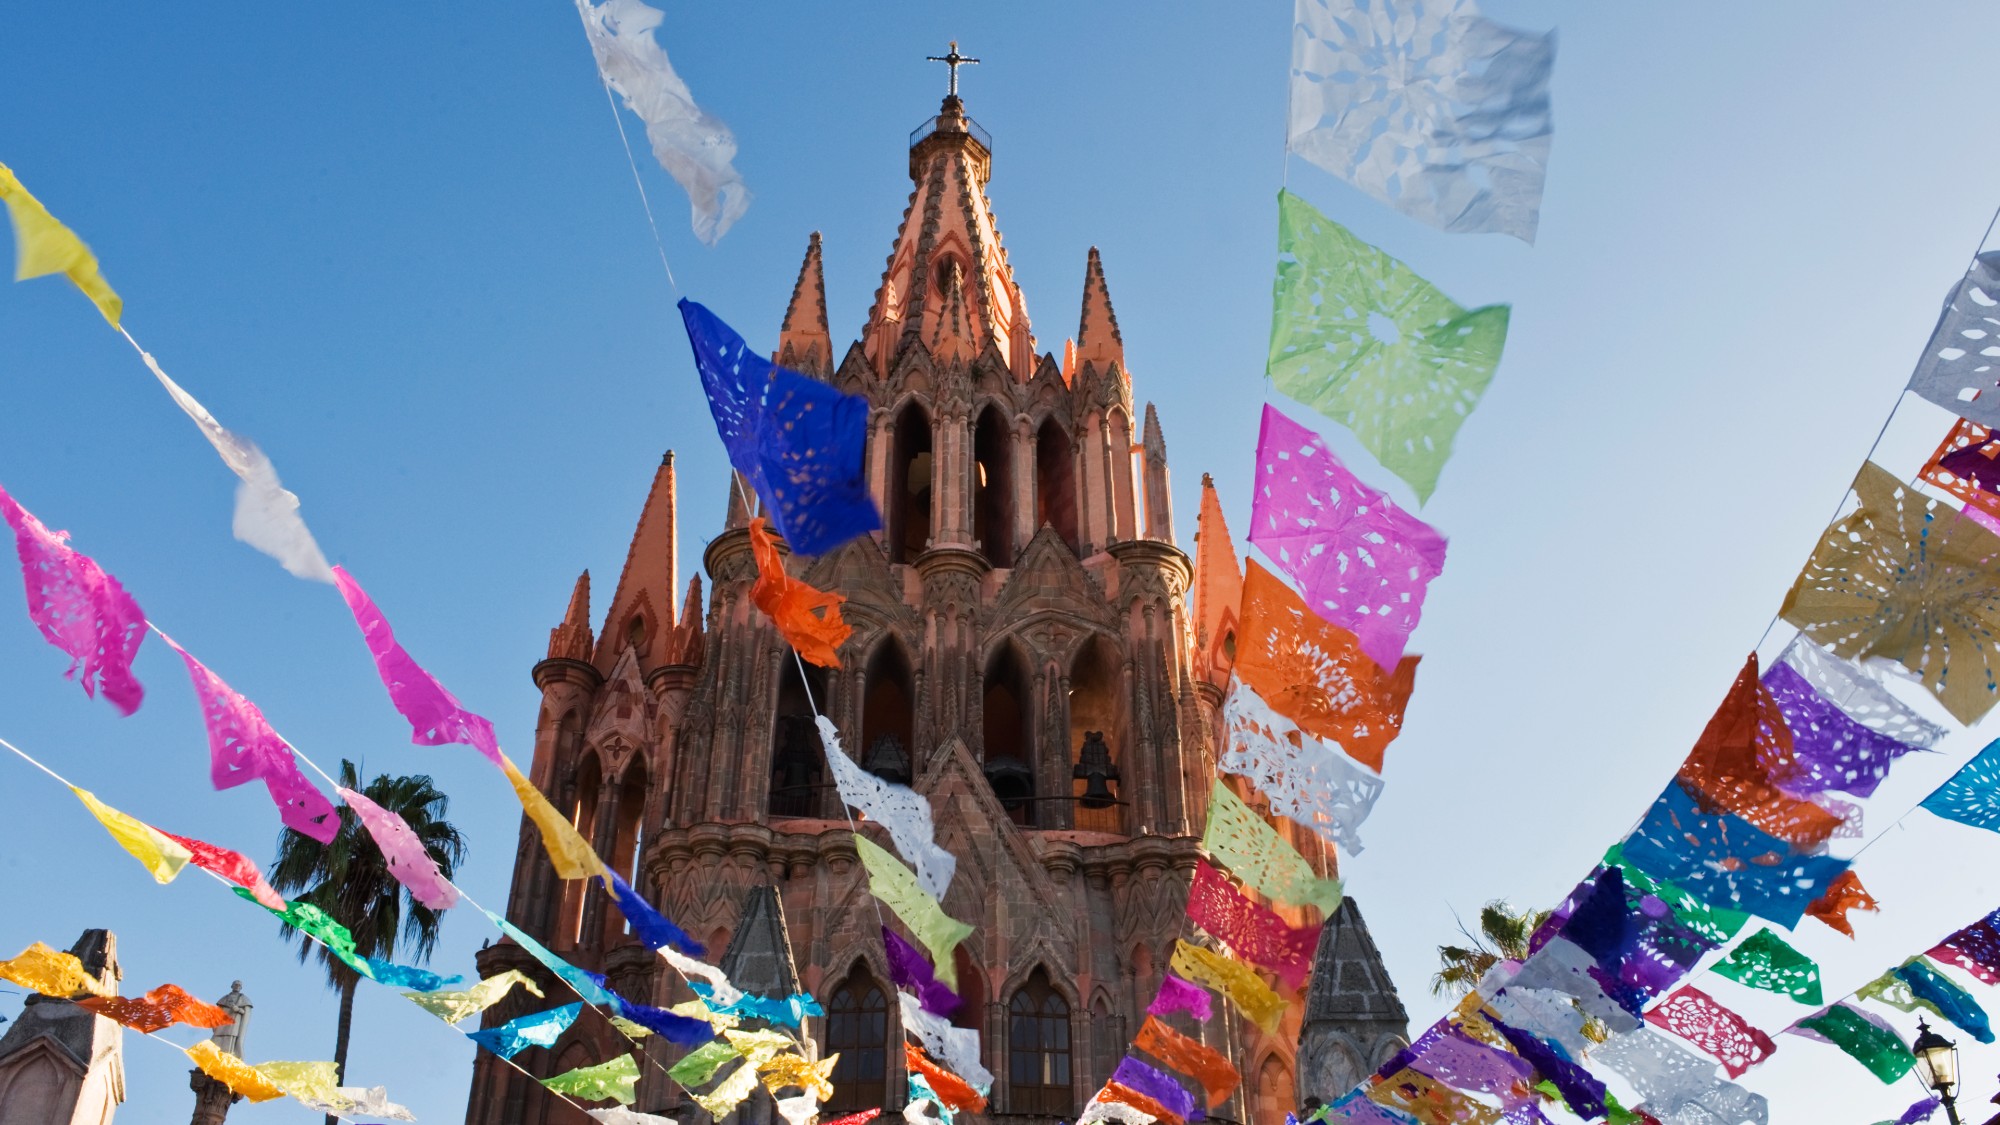  Wander through the broad cultural diversity of Mexico in 5 cities 